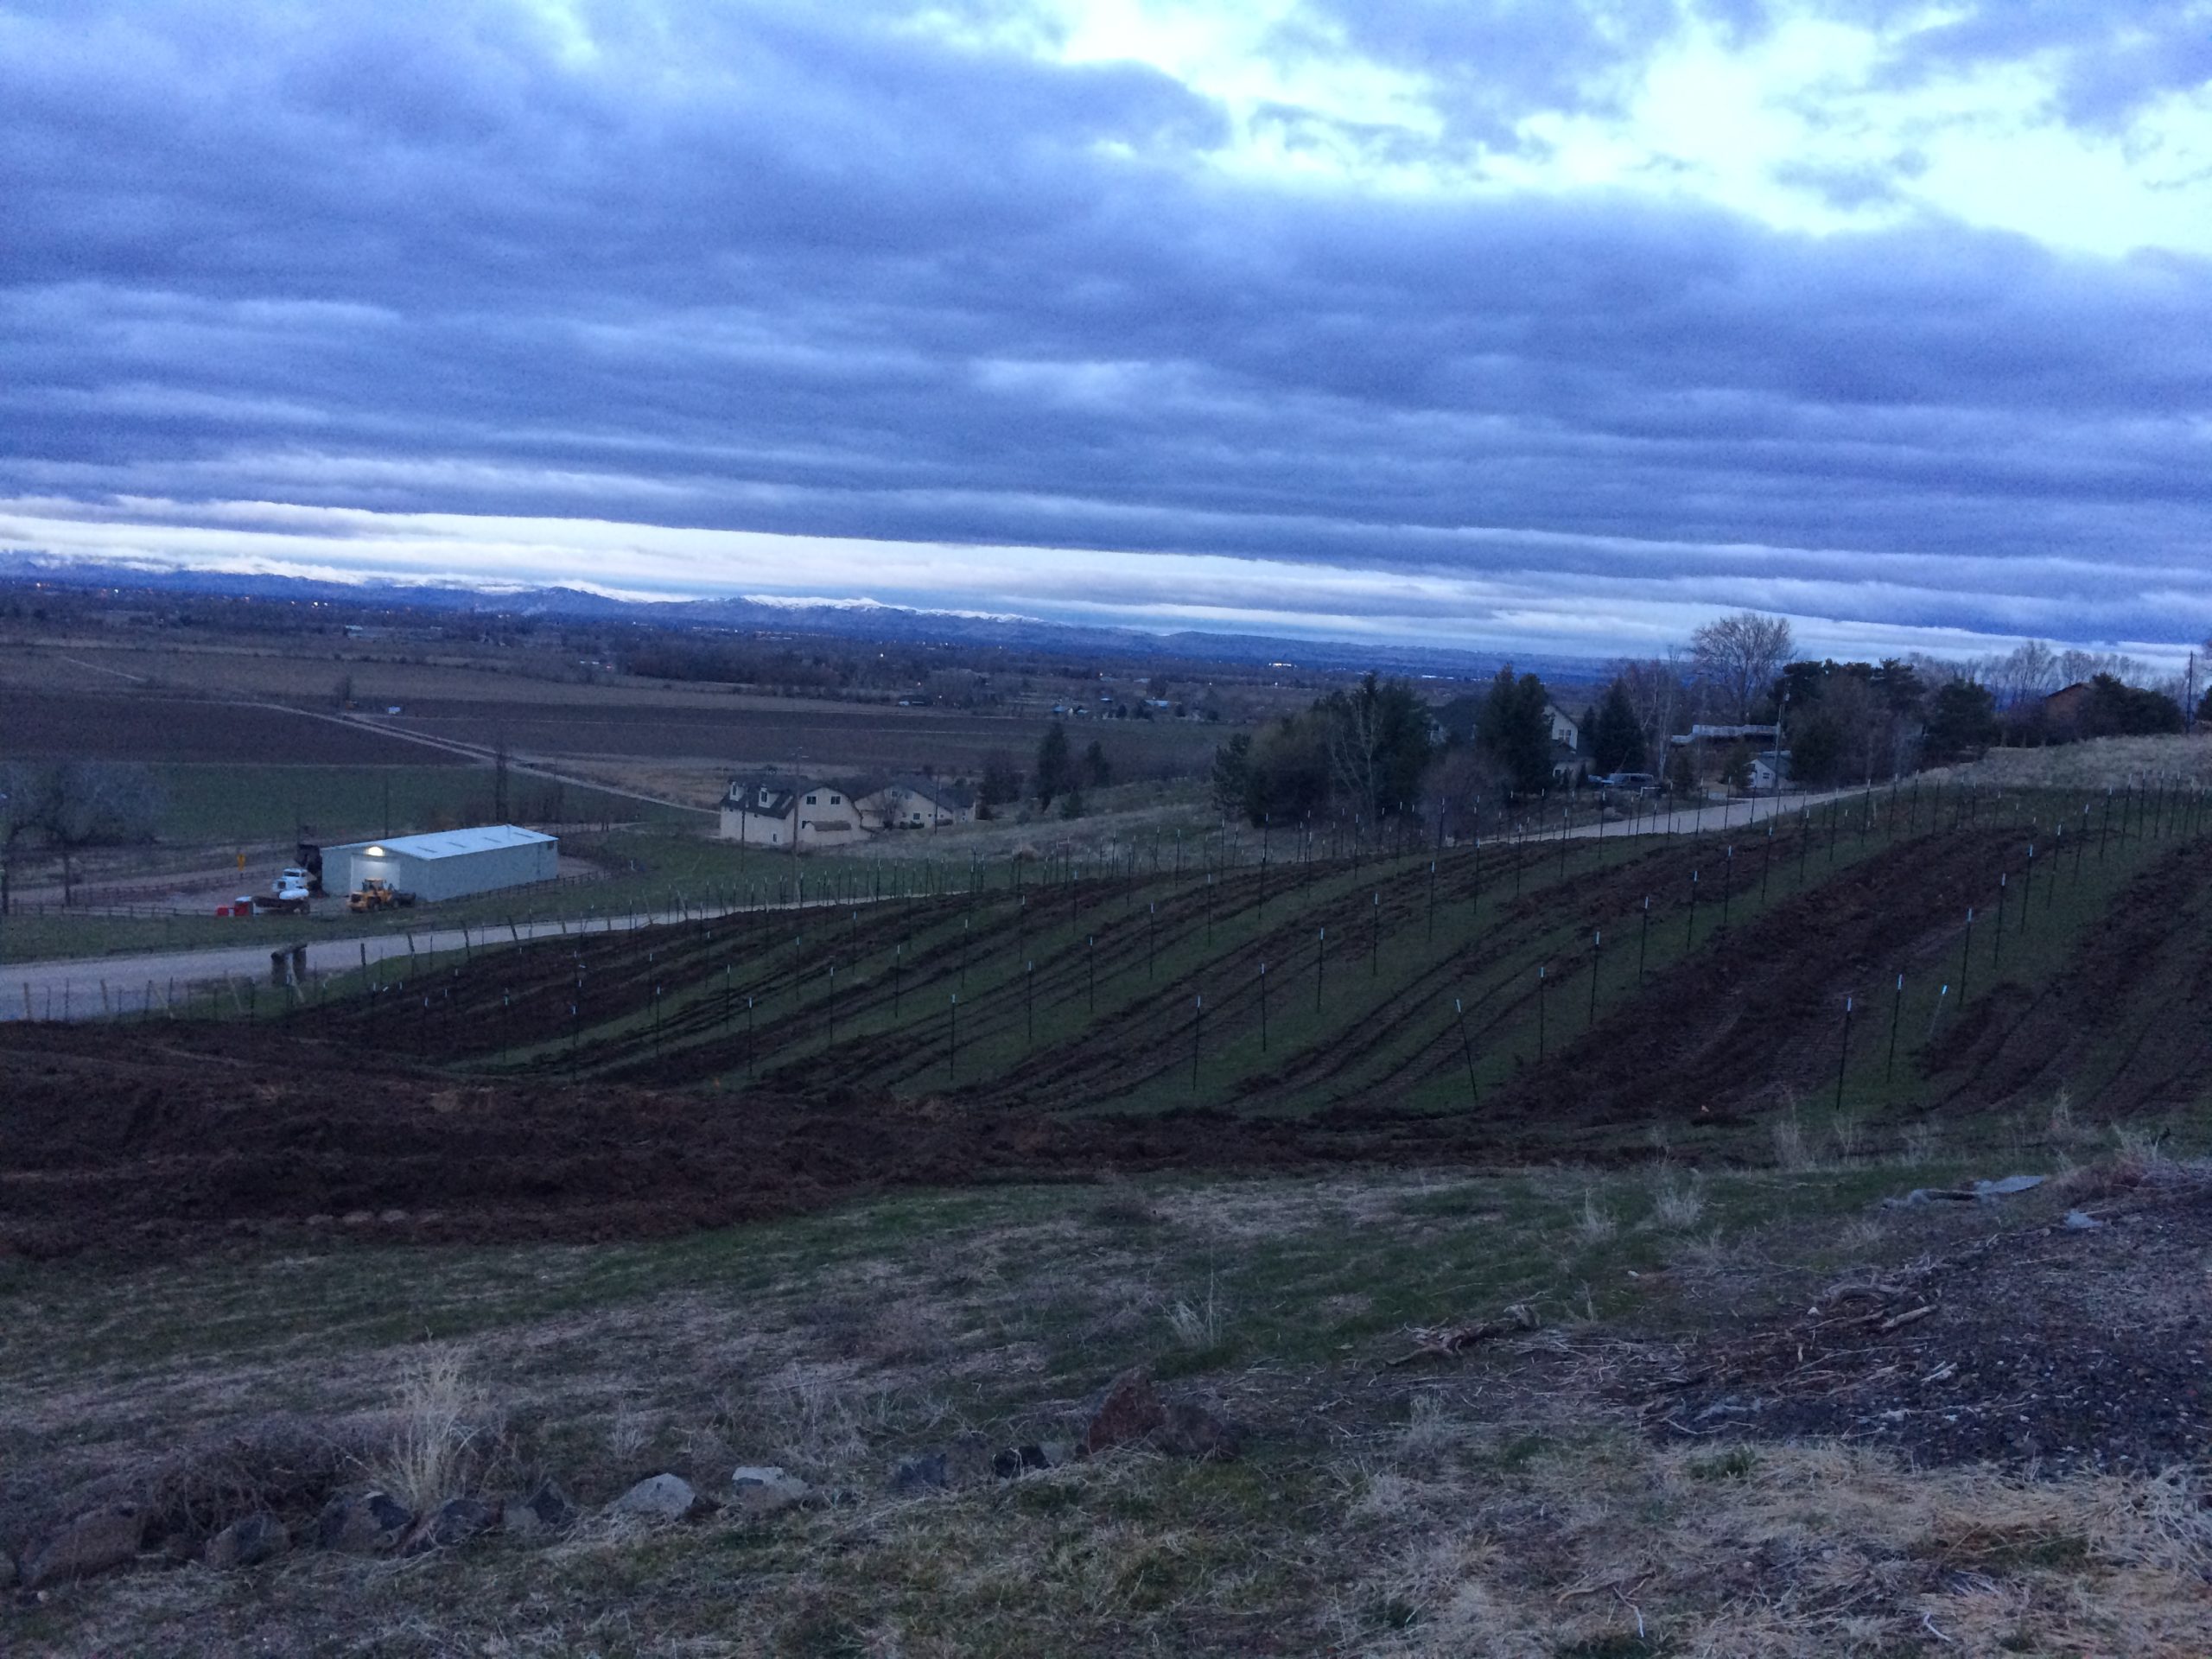 2014 - Scott and Denise Smith purchase the future site of Sol Invictus Vineyard.  Scott retires from military service and the family relocates to Star, Idaho.
